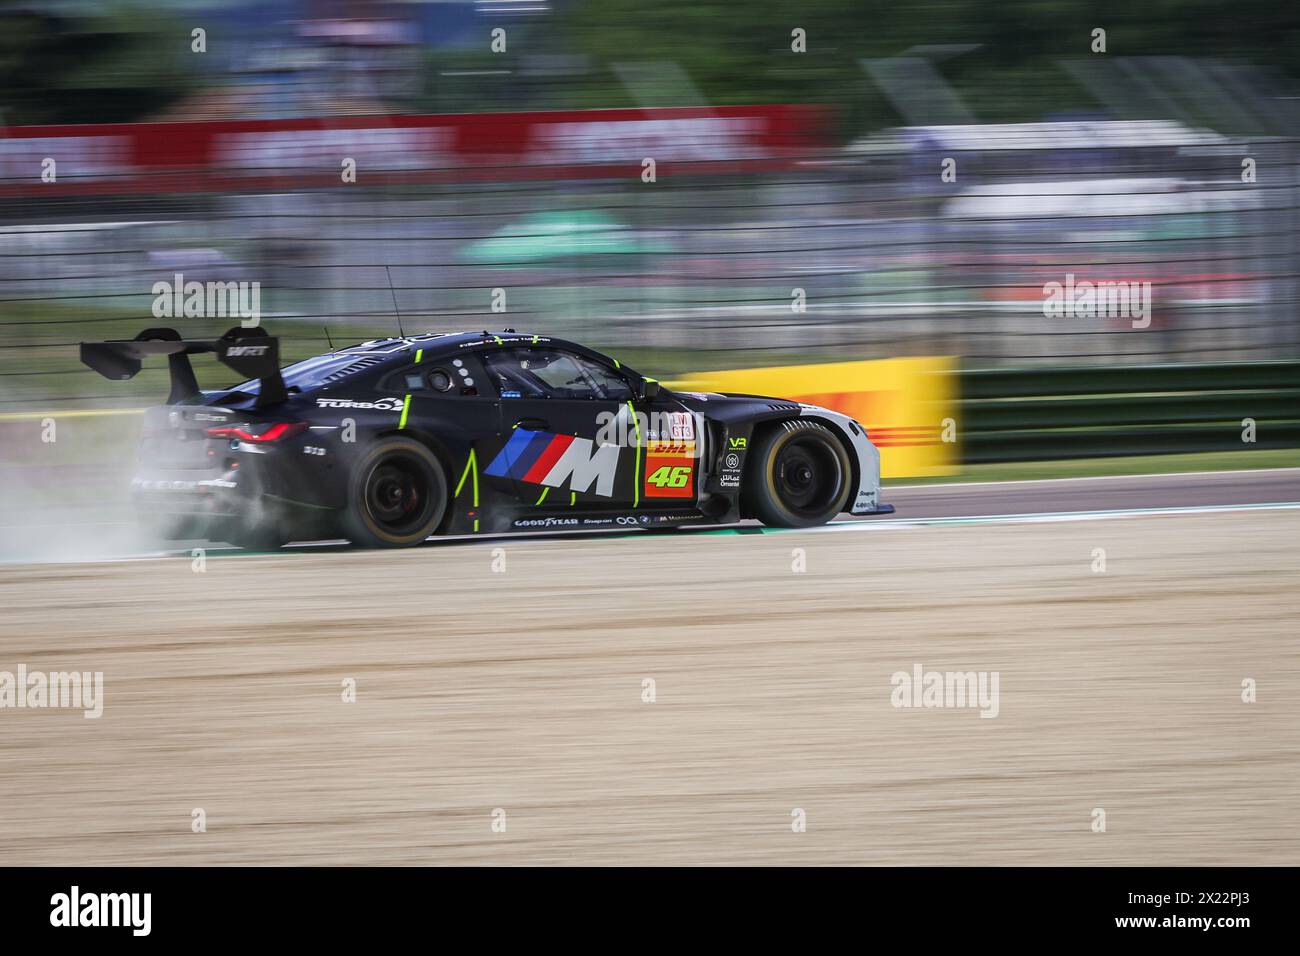 Imola, Italy, 19 April 2024, #46 Team WRT (Bel) BMW M4 GT3 (LMGT3) Valentino Rossi (Ita) / Ahmad Al Harthy (Omn) / Maxime Martin (Bel)  during the 6 Hours of Imola, second race of the 2024 FIA World Endurance Championship (FIA WEC) at Autodromo Internazionale Enzo e Dino Ferrari from April 18 to 21, 2024 in Imola, Italy - Photo Bruno Vandevelde/MPS Agency Credit MPS Agency/Alamy Live News Stock Photo